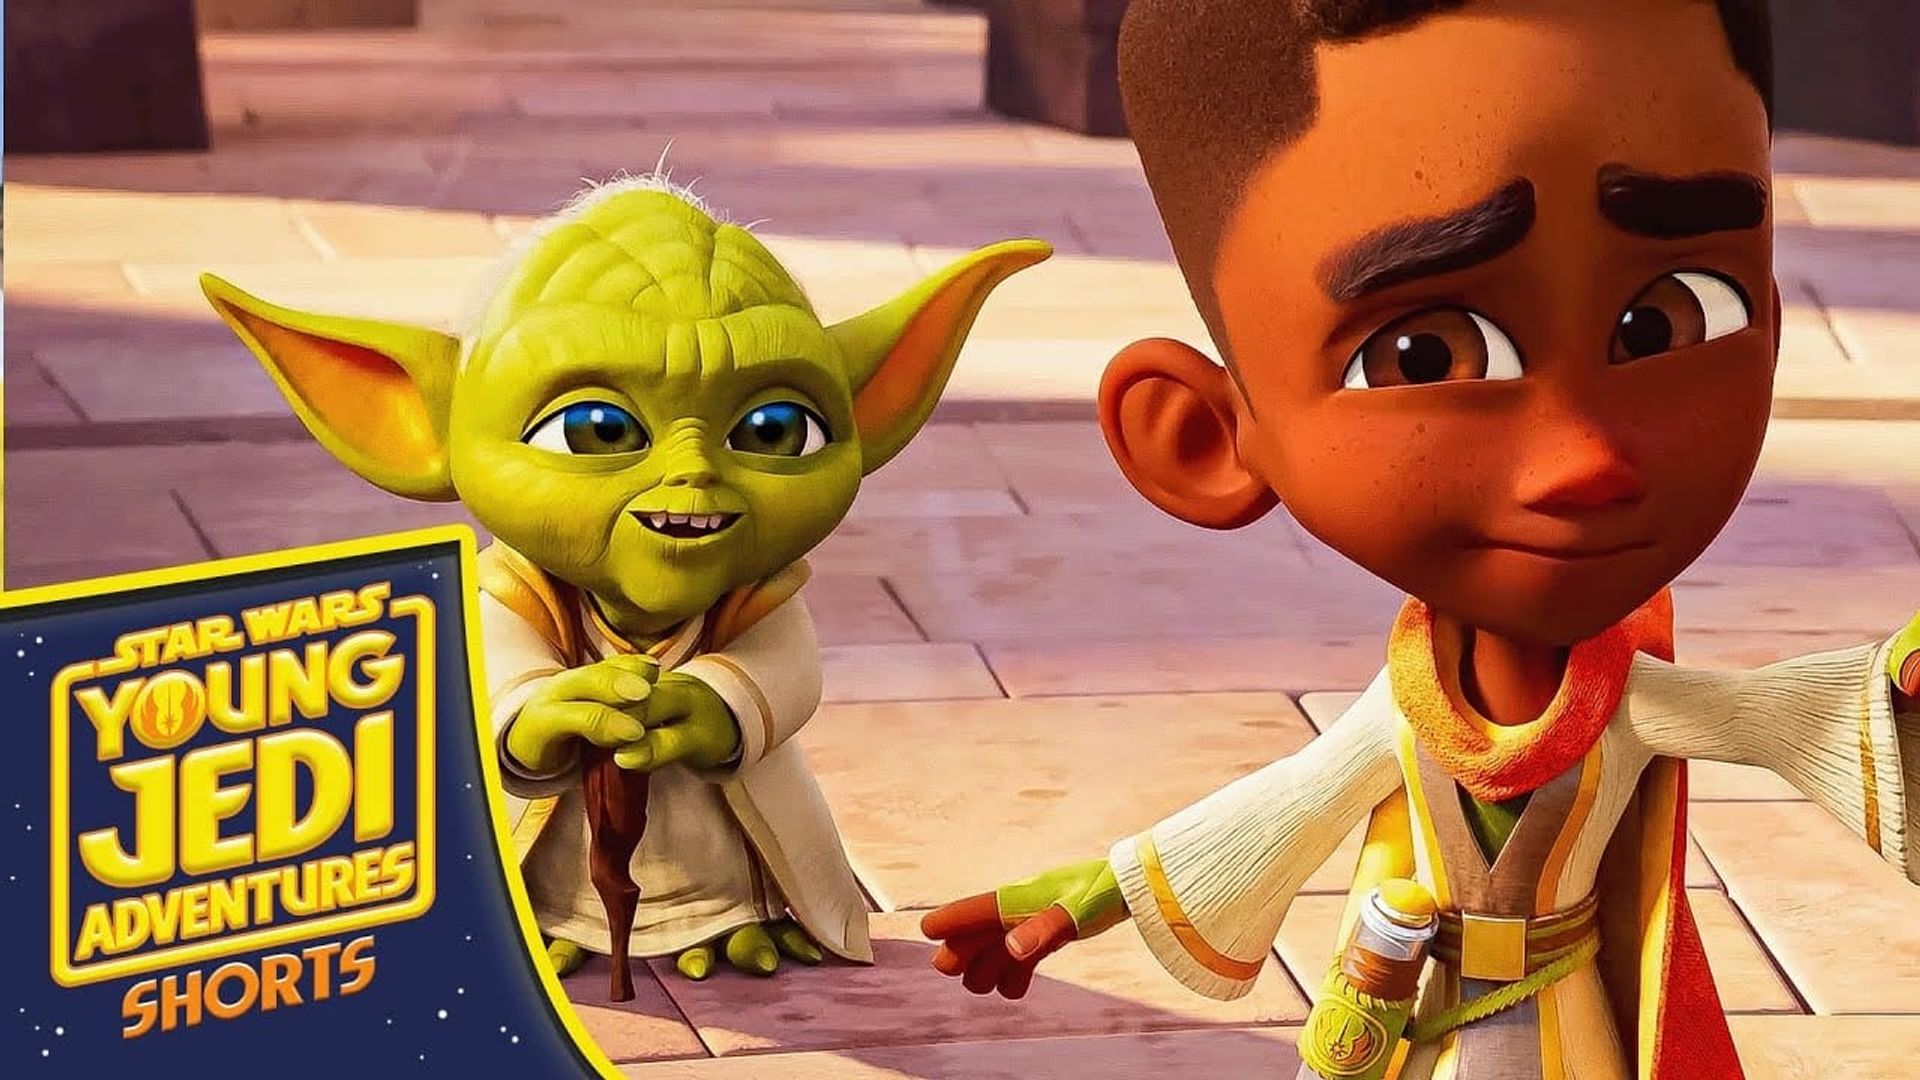 Star Wars: Young Jedi Adventures Shorts background